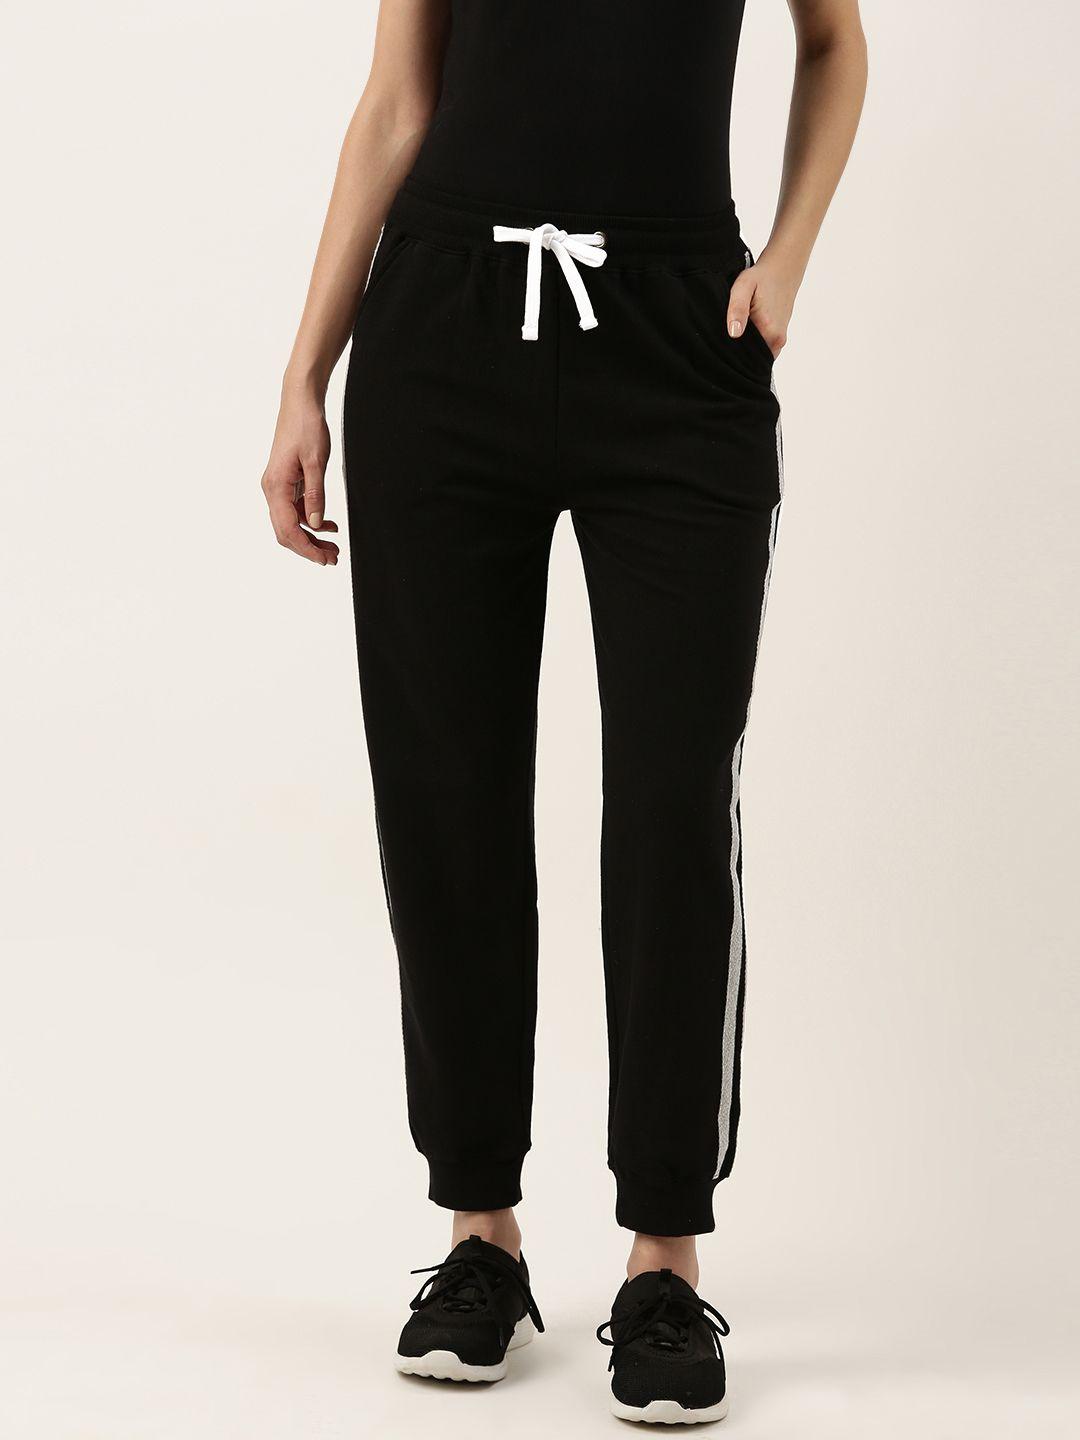 arise-women-side-striped-terry-joggers